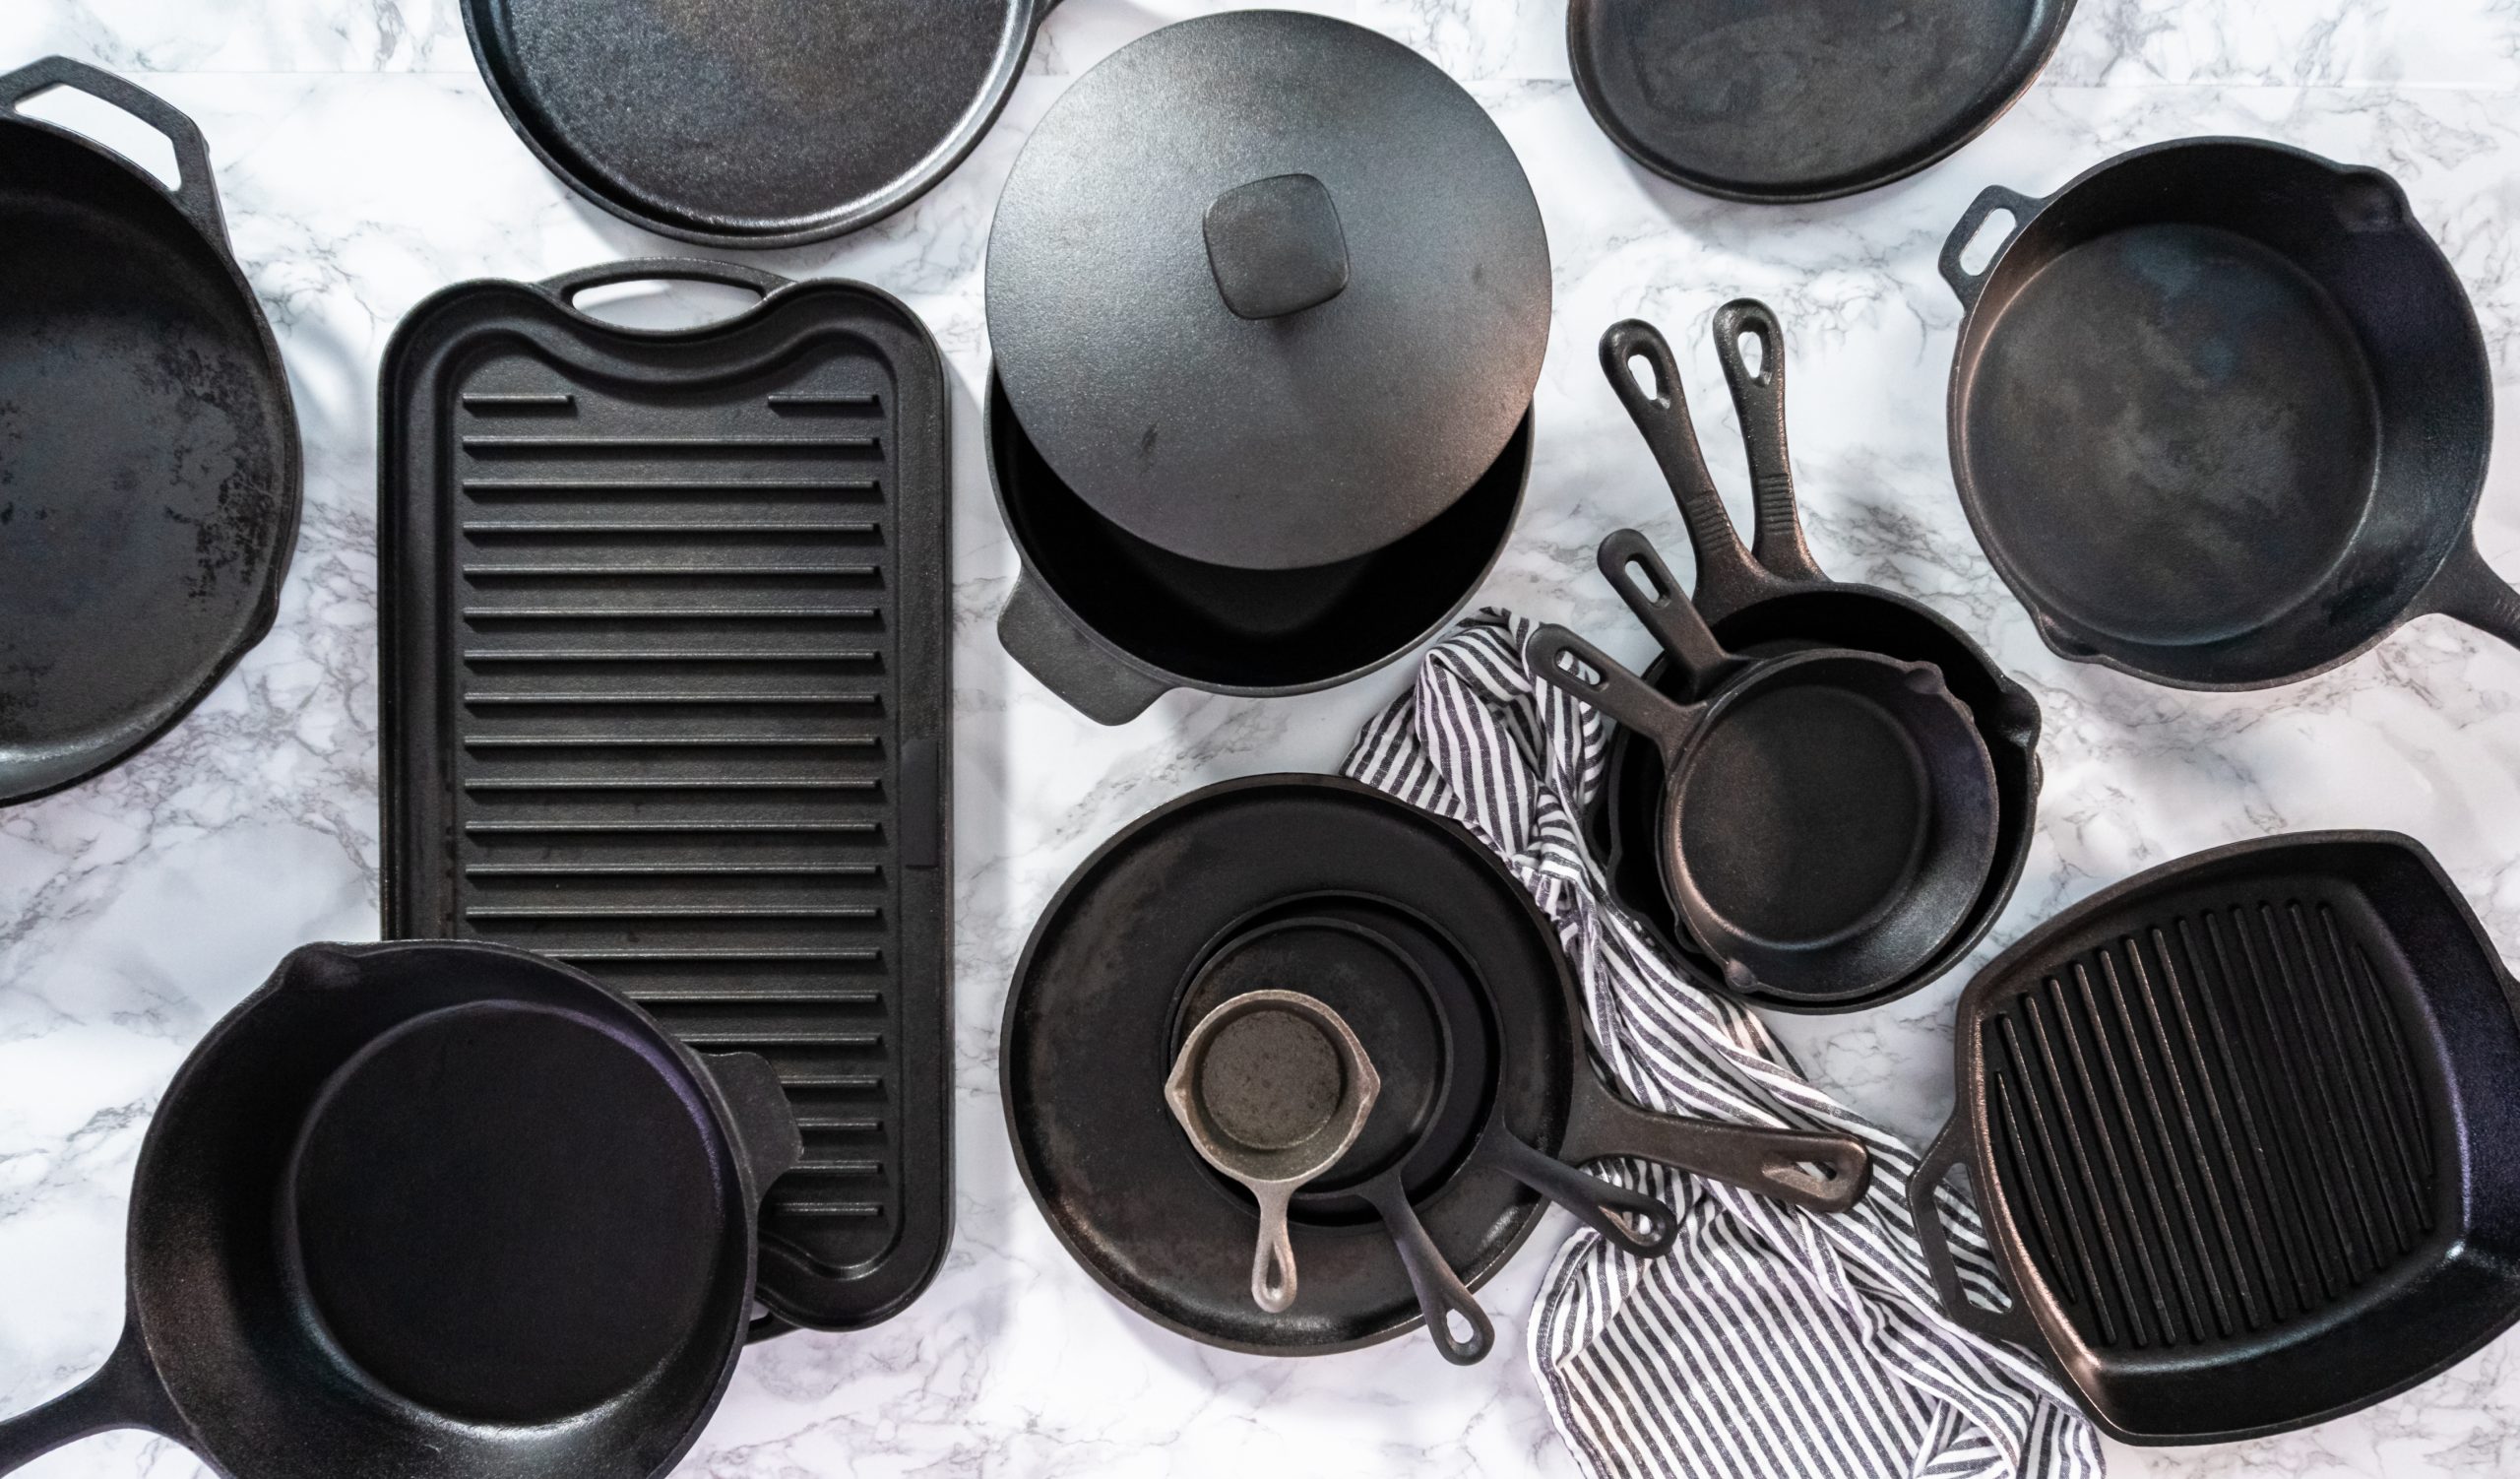 Shopping for Cast Iron